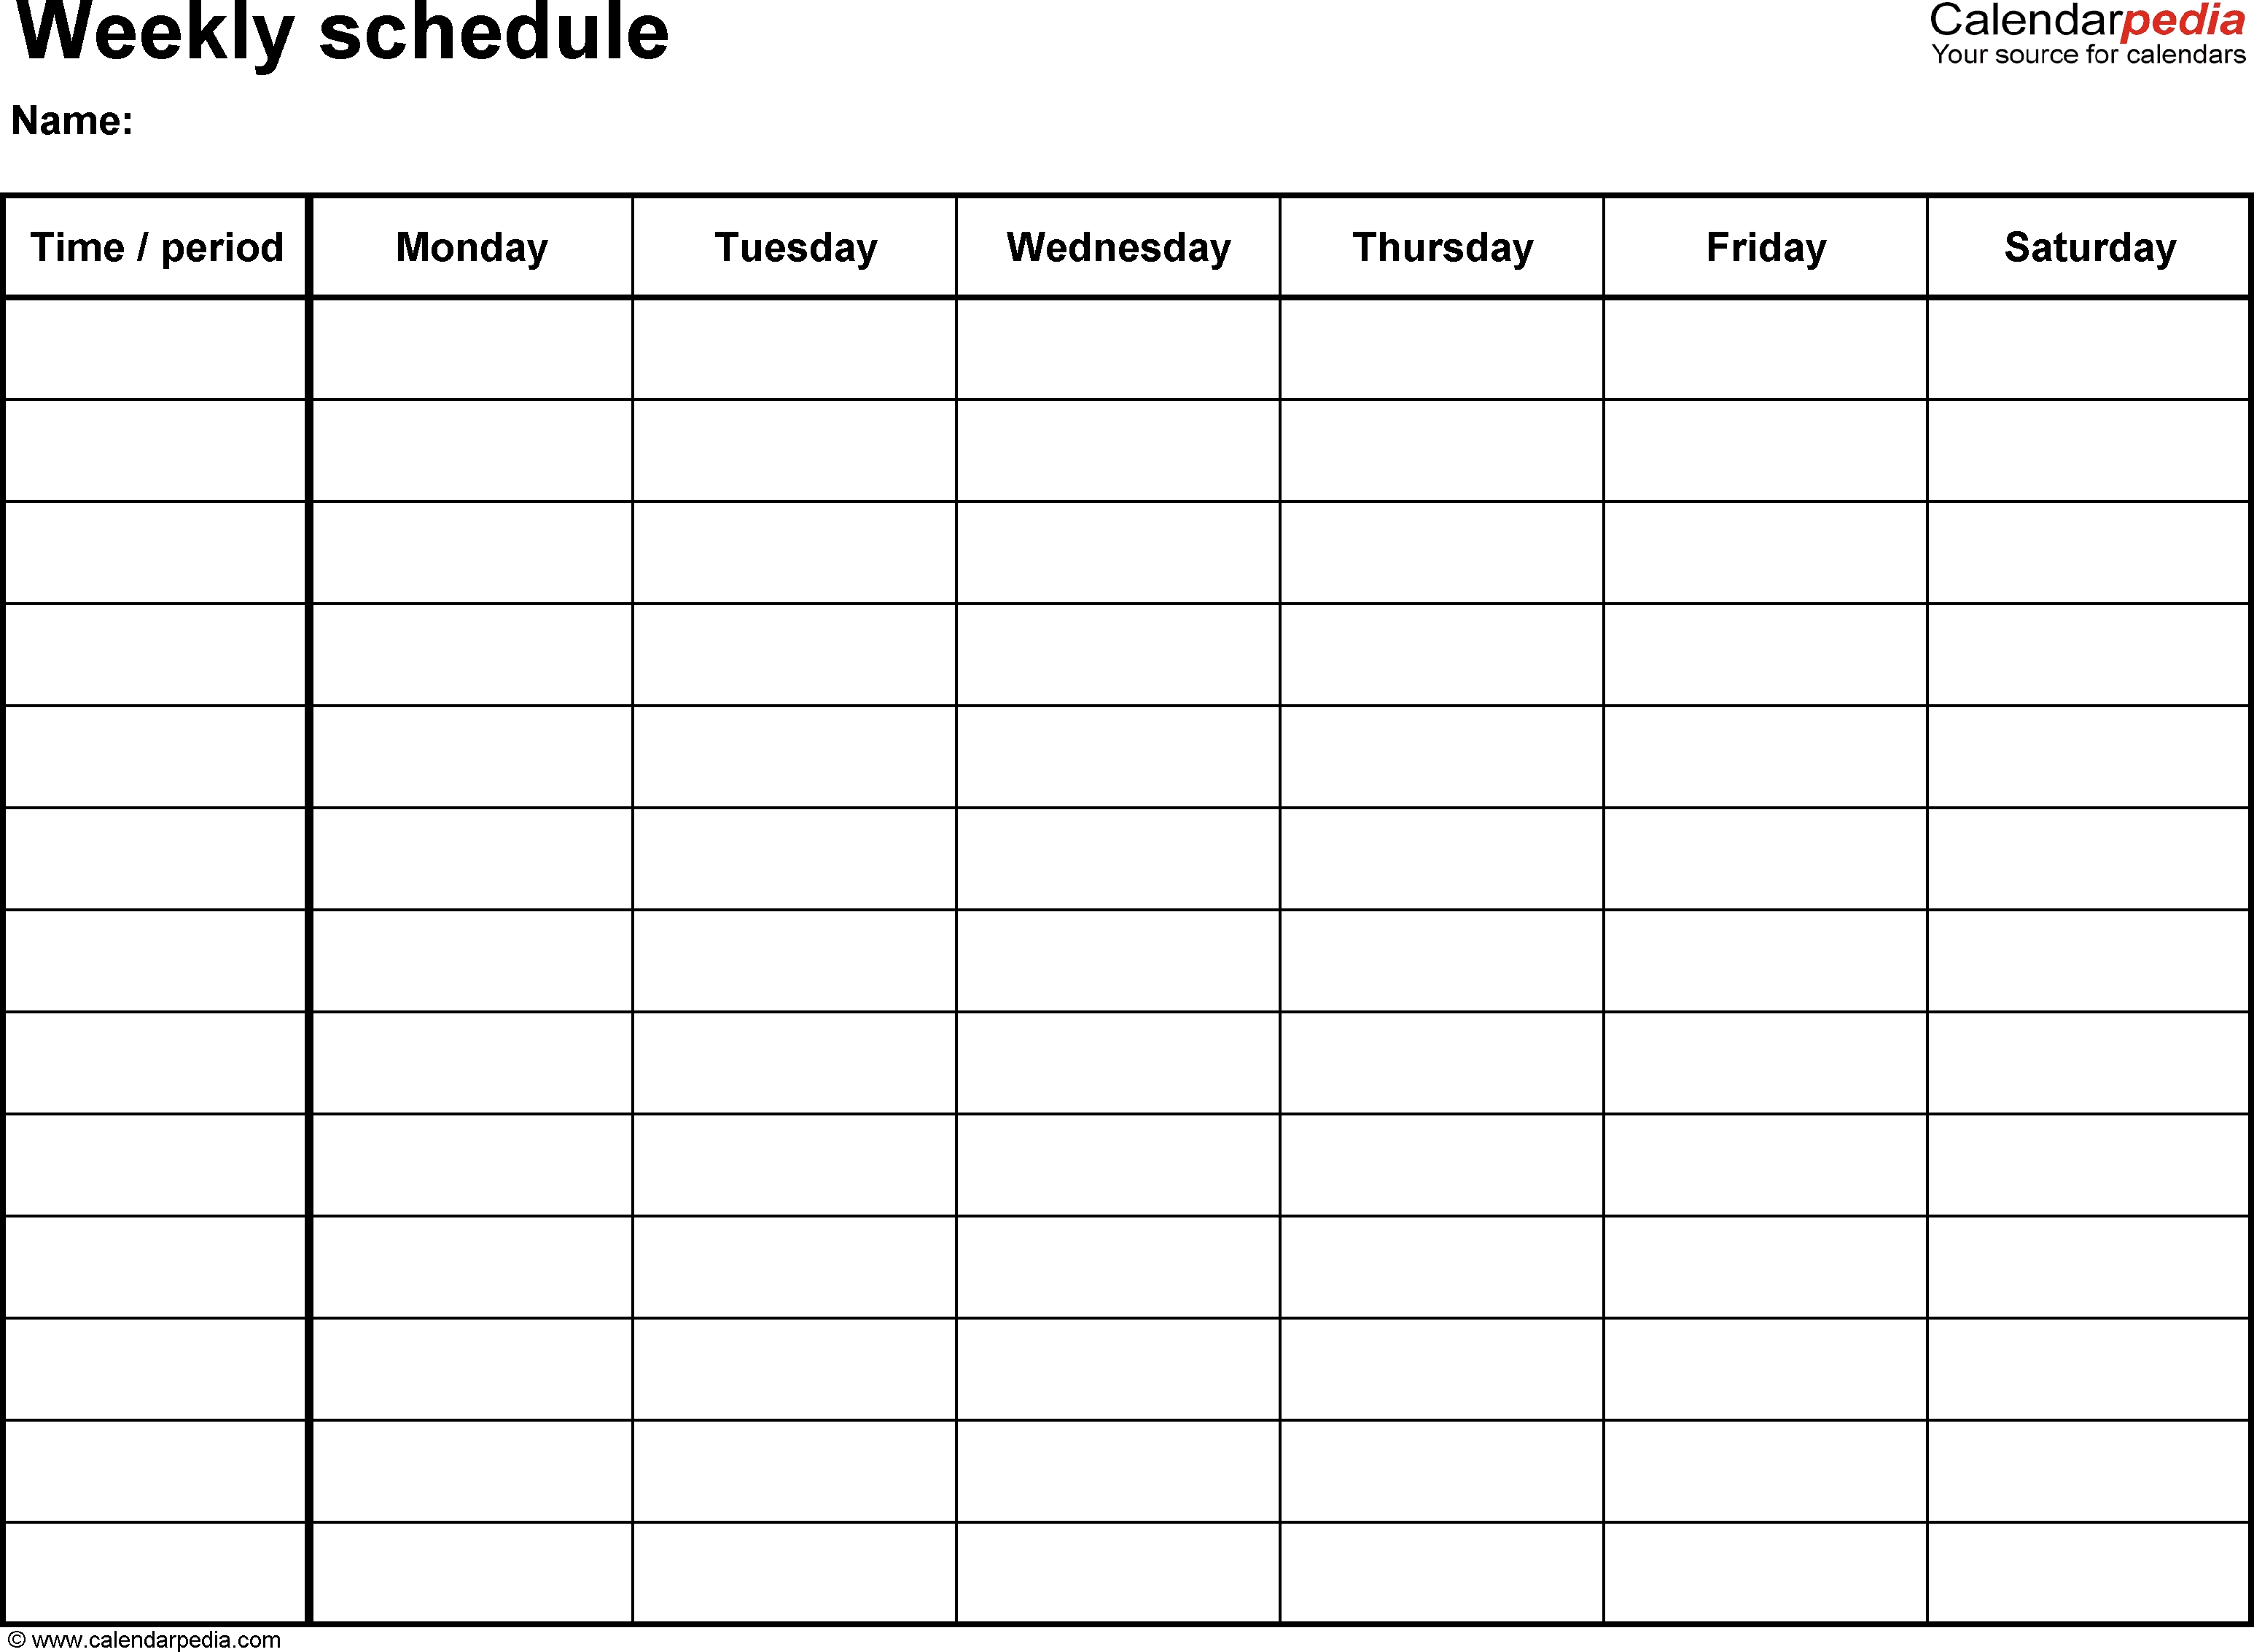 Free Weekly Schedule Templates For Excel - 18 Templates within Blank Copy Of Monthly Sign Up Sheet Calendar Schedule